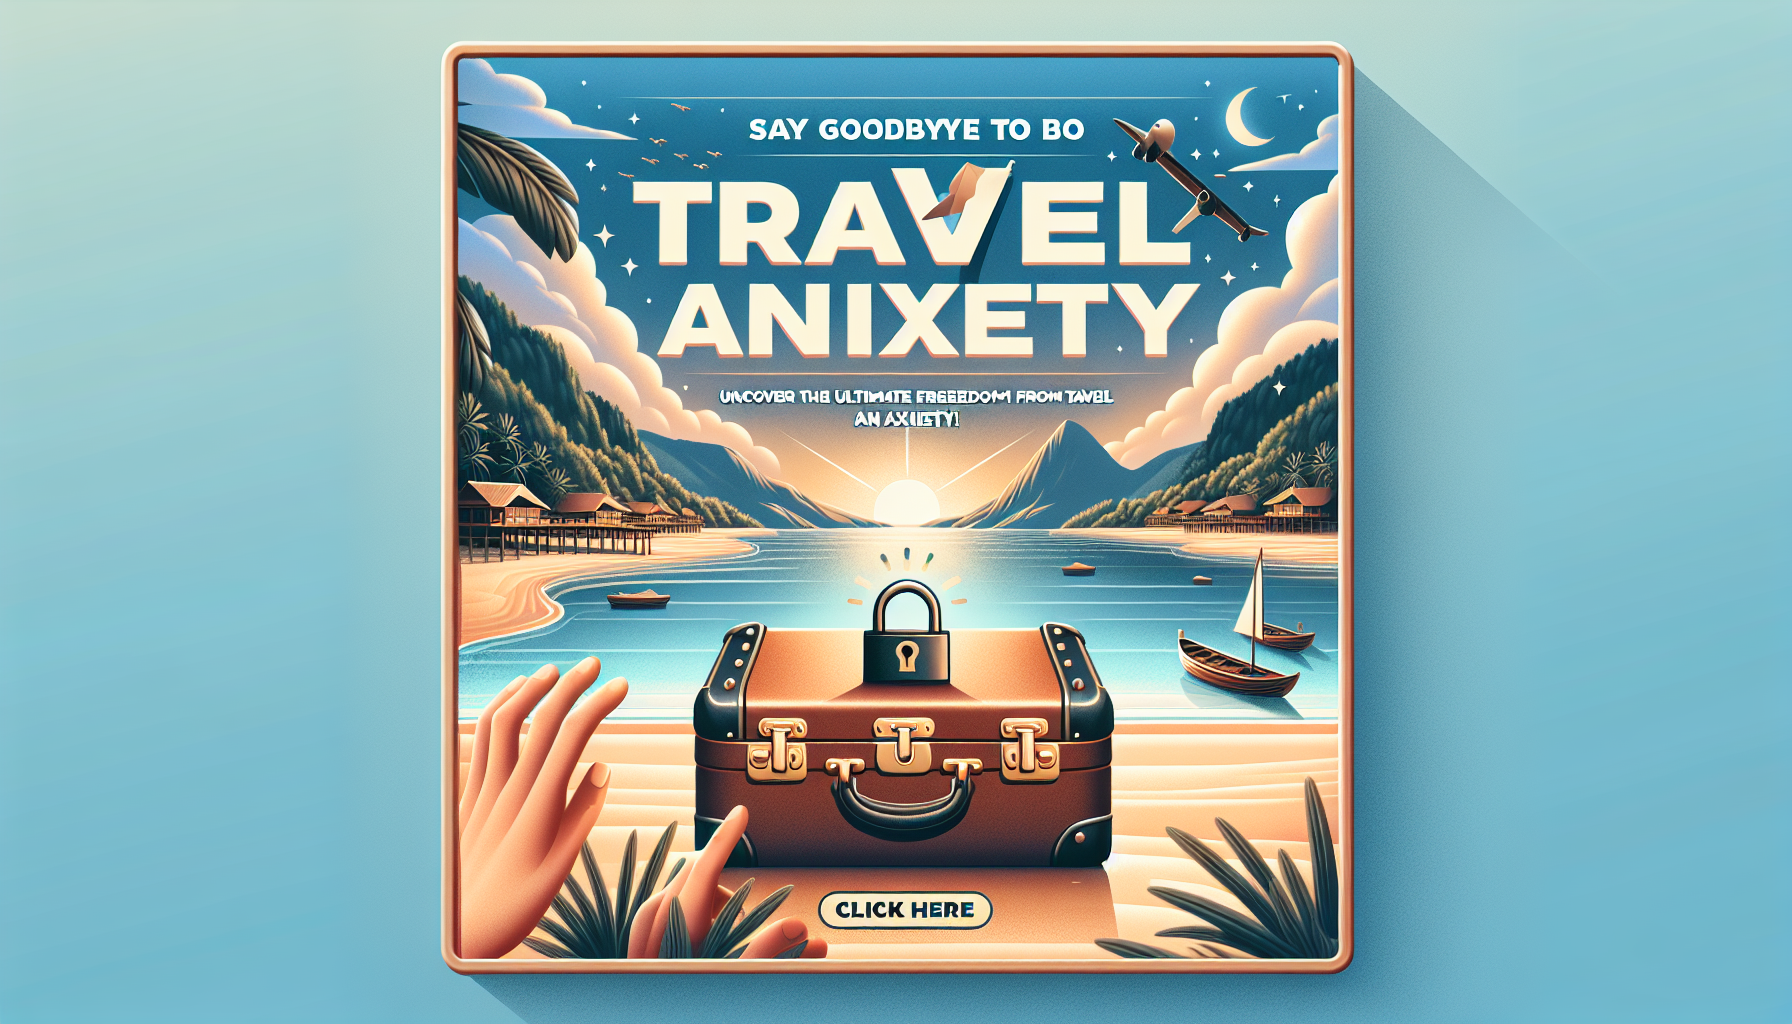 conquer travel nerves and enjoy anxiety-free adventures with expert tips on how to stop worrying when traveling.